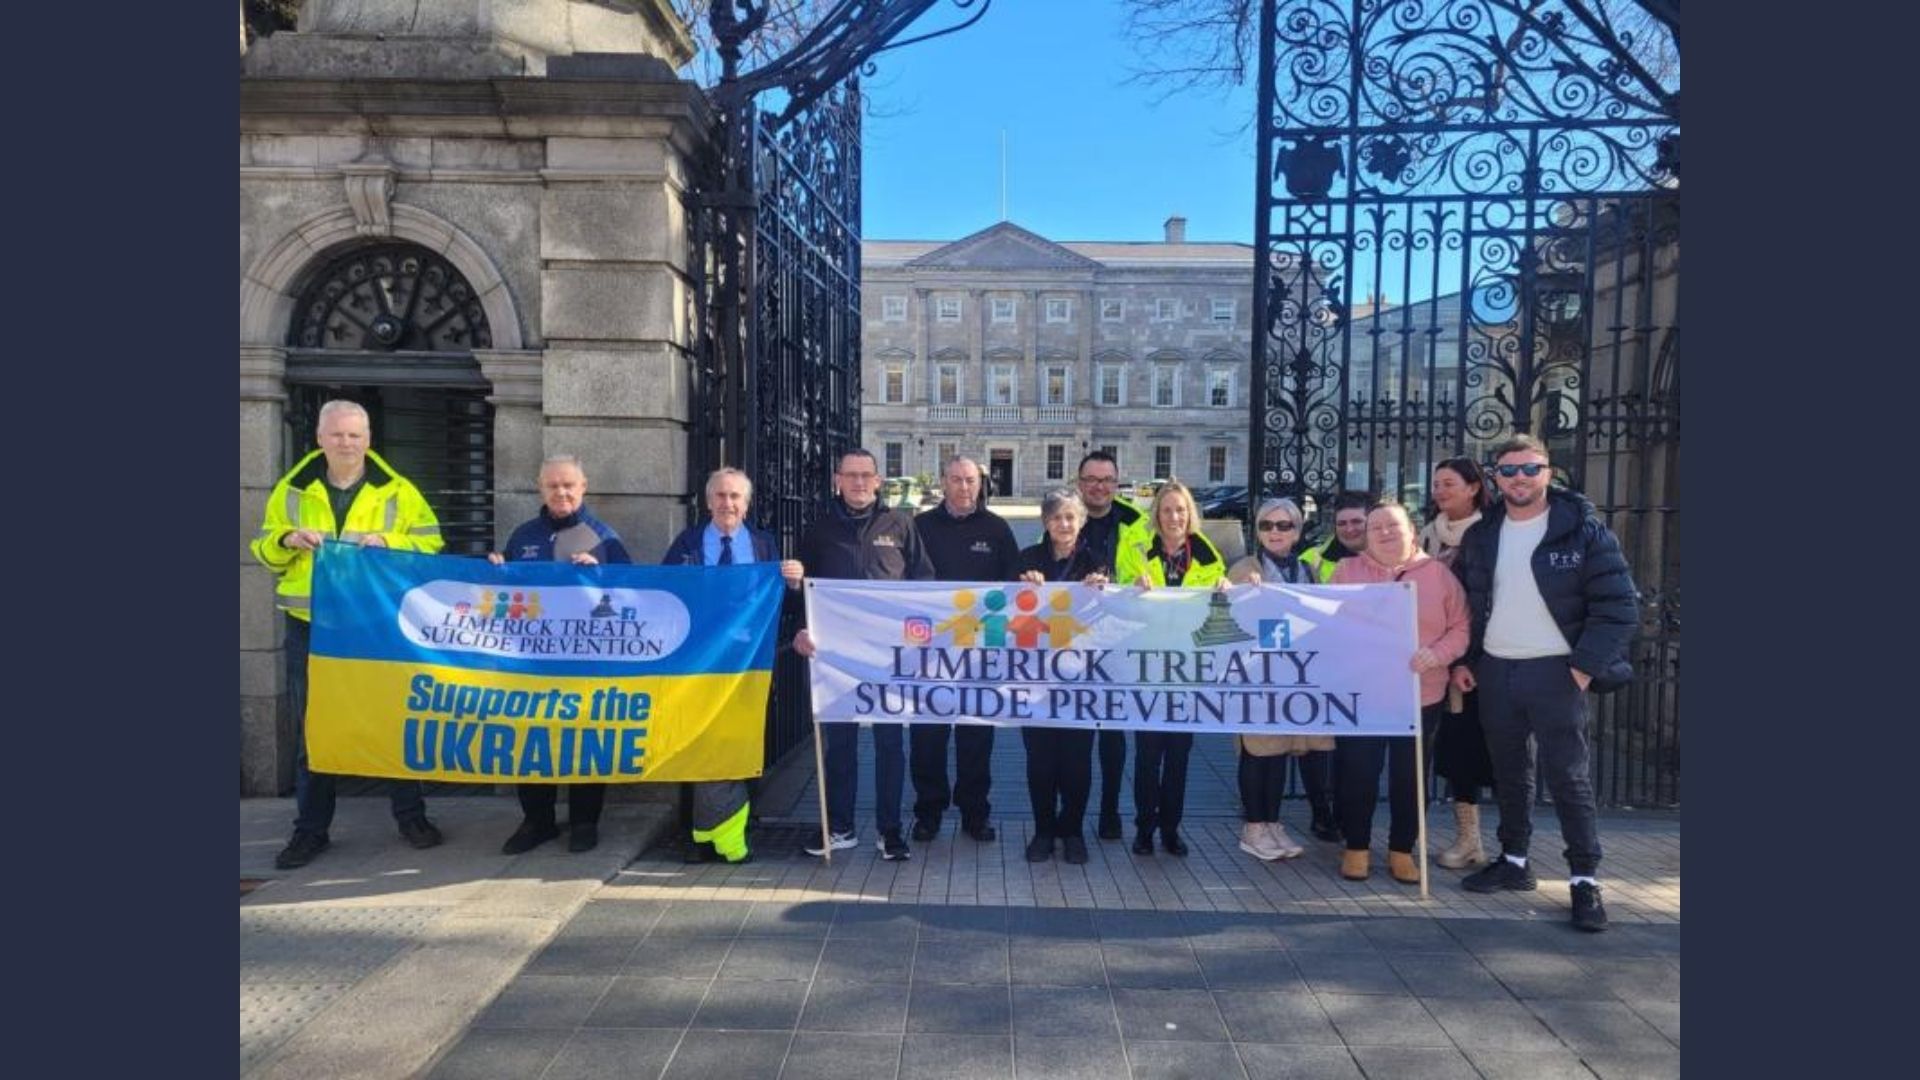 LTSP new base - A campaign for a new Limerick Treaty Suicide Prevention base has been taken to Dail Eireann to highlight the urgent need for a new base in Limerick City